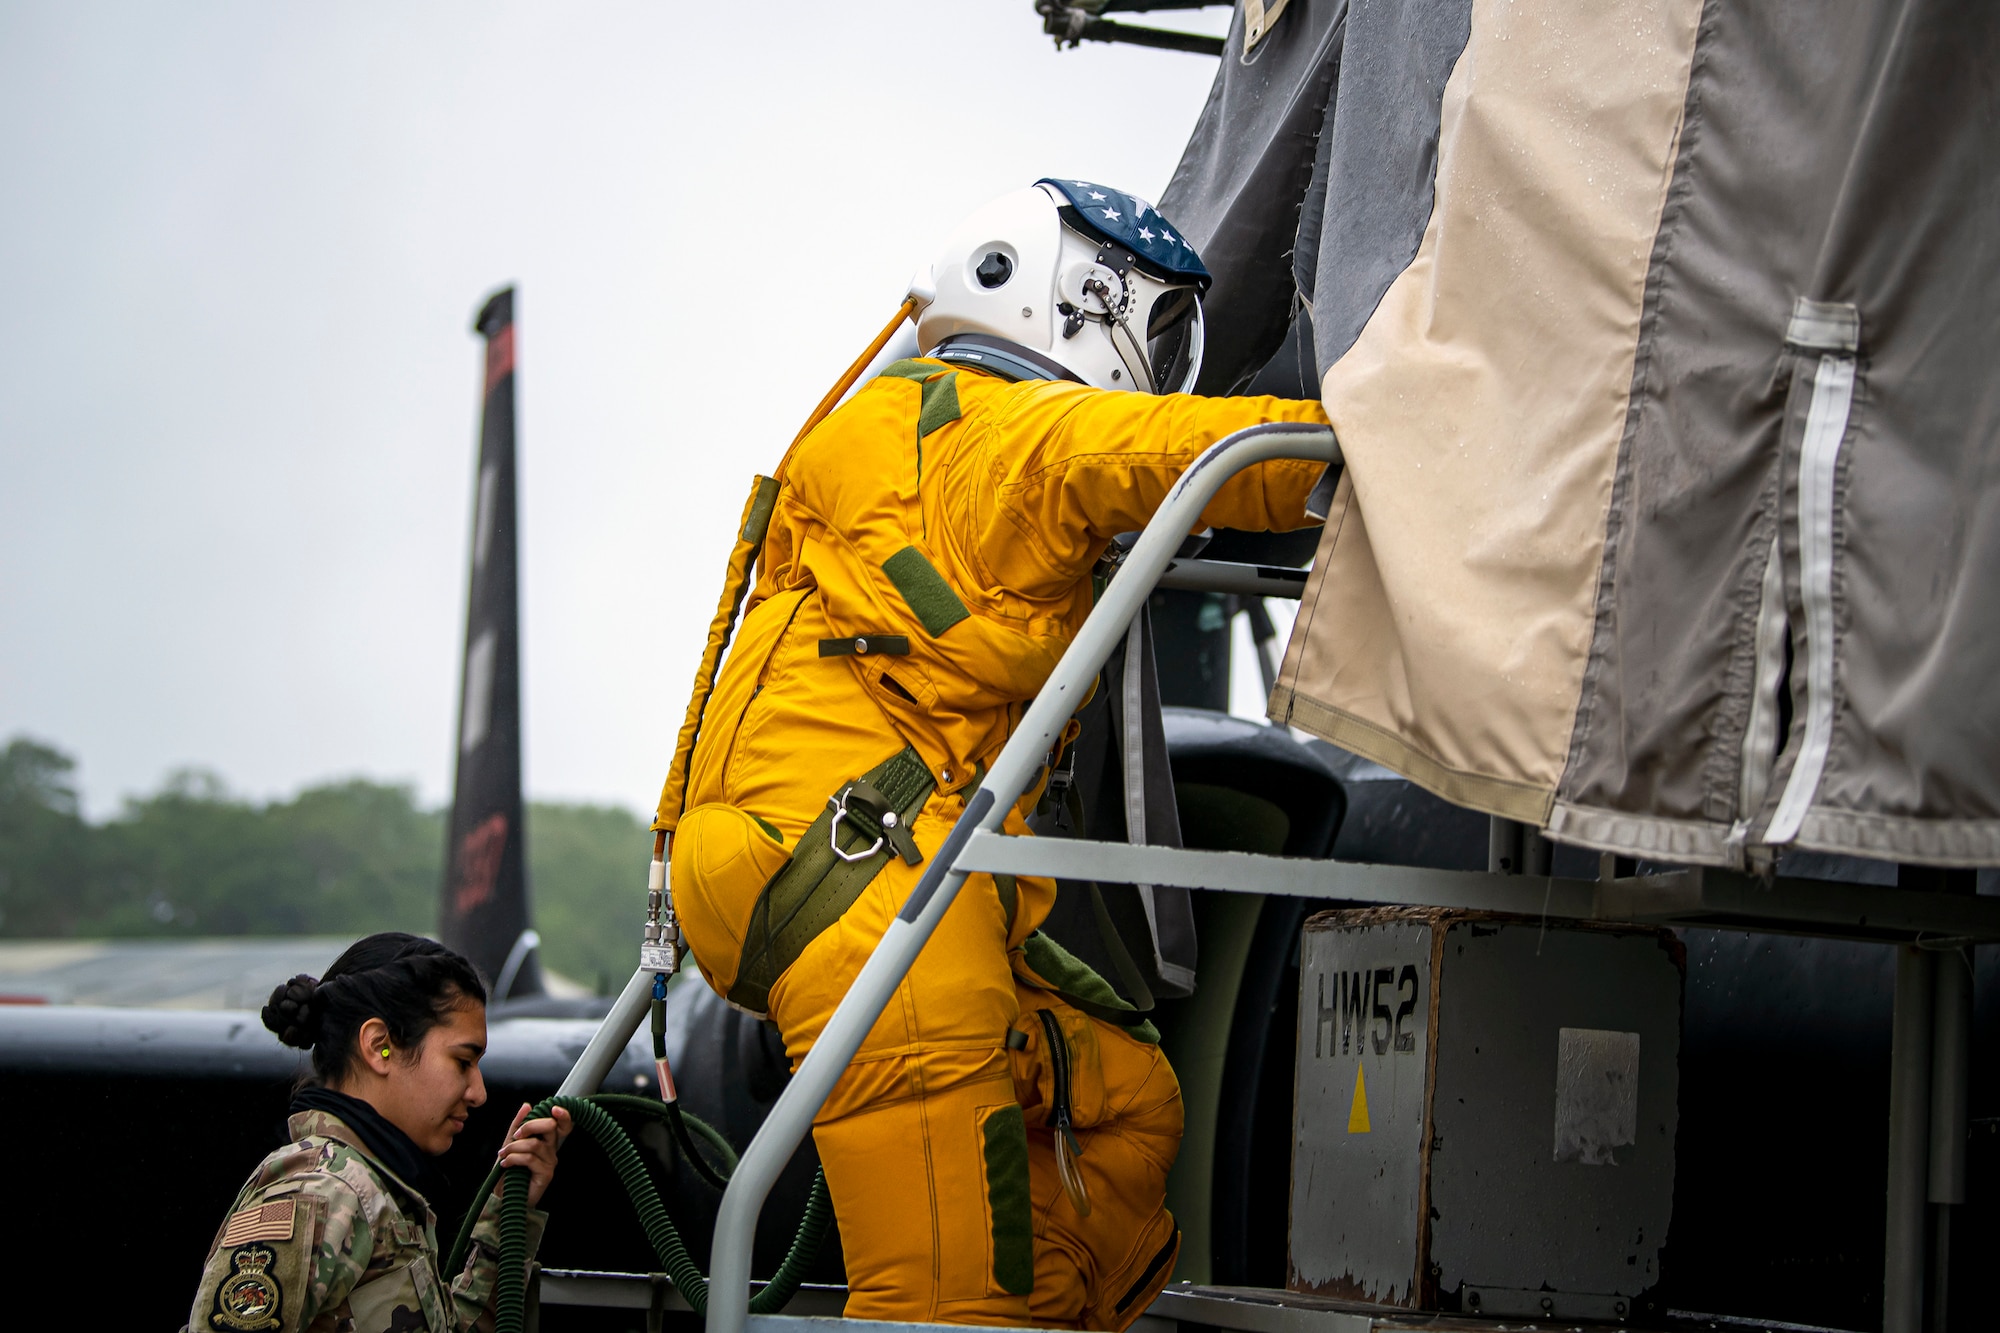 U.S. Air Force Capt. Joshua Hall, right, 99th Reconnaissance Squadron (ERS) U-2 Dragon Lady pilot, climbs into the cockpit of a U-2 aircraft while Senior Airman Cynthia Rivera, 99th ERS physiology support technician, helps transport his oxygen at RAF Fairford, England, July 8, 2020. The U-2 aircraft assigned to the 9th Reconnaissance Wing, Beale Air Force Base, Calif., are currently deployed to RAF Fairford as part of the 99th ERS. The aircraft supplements a variety of missions that enhance regional and global security in support of U.S. and NATO allies and regional partners. (U.S. Air Force photo by Senior Airman Eugene Oliver)